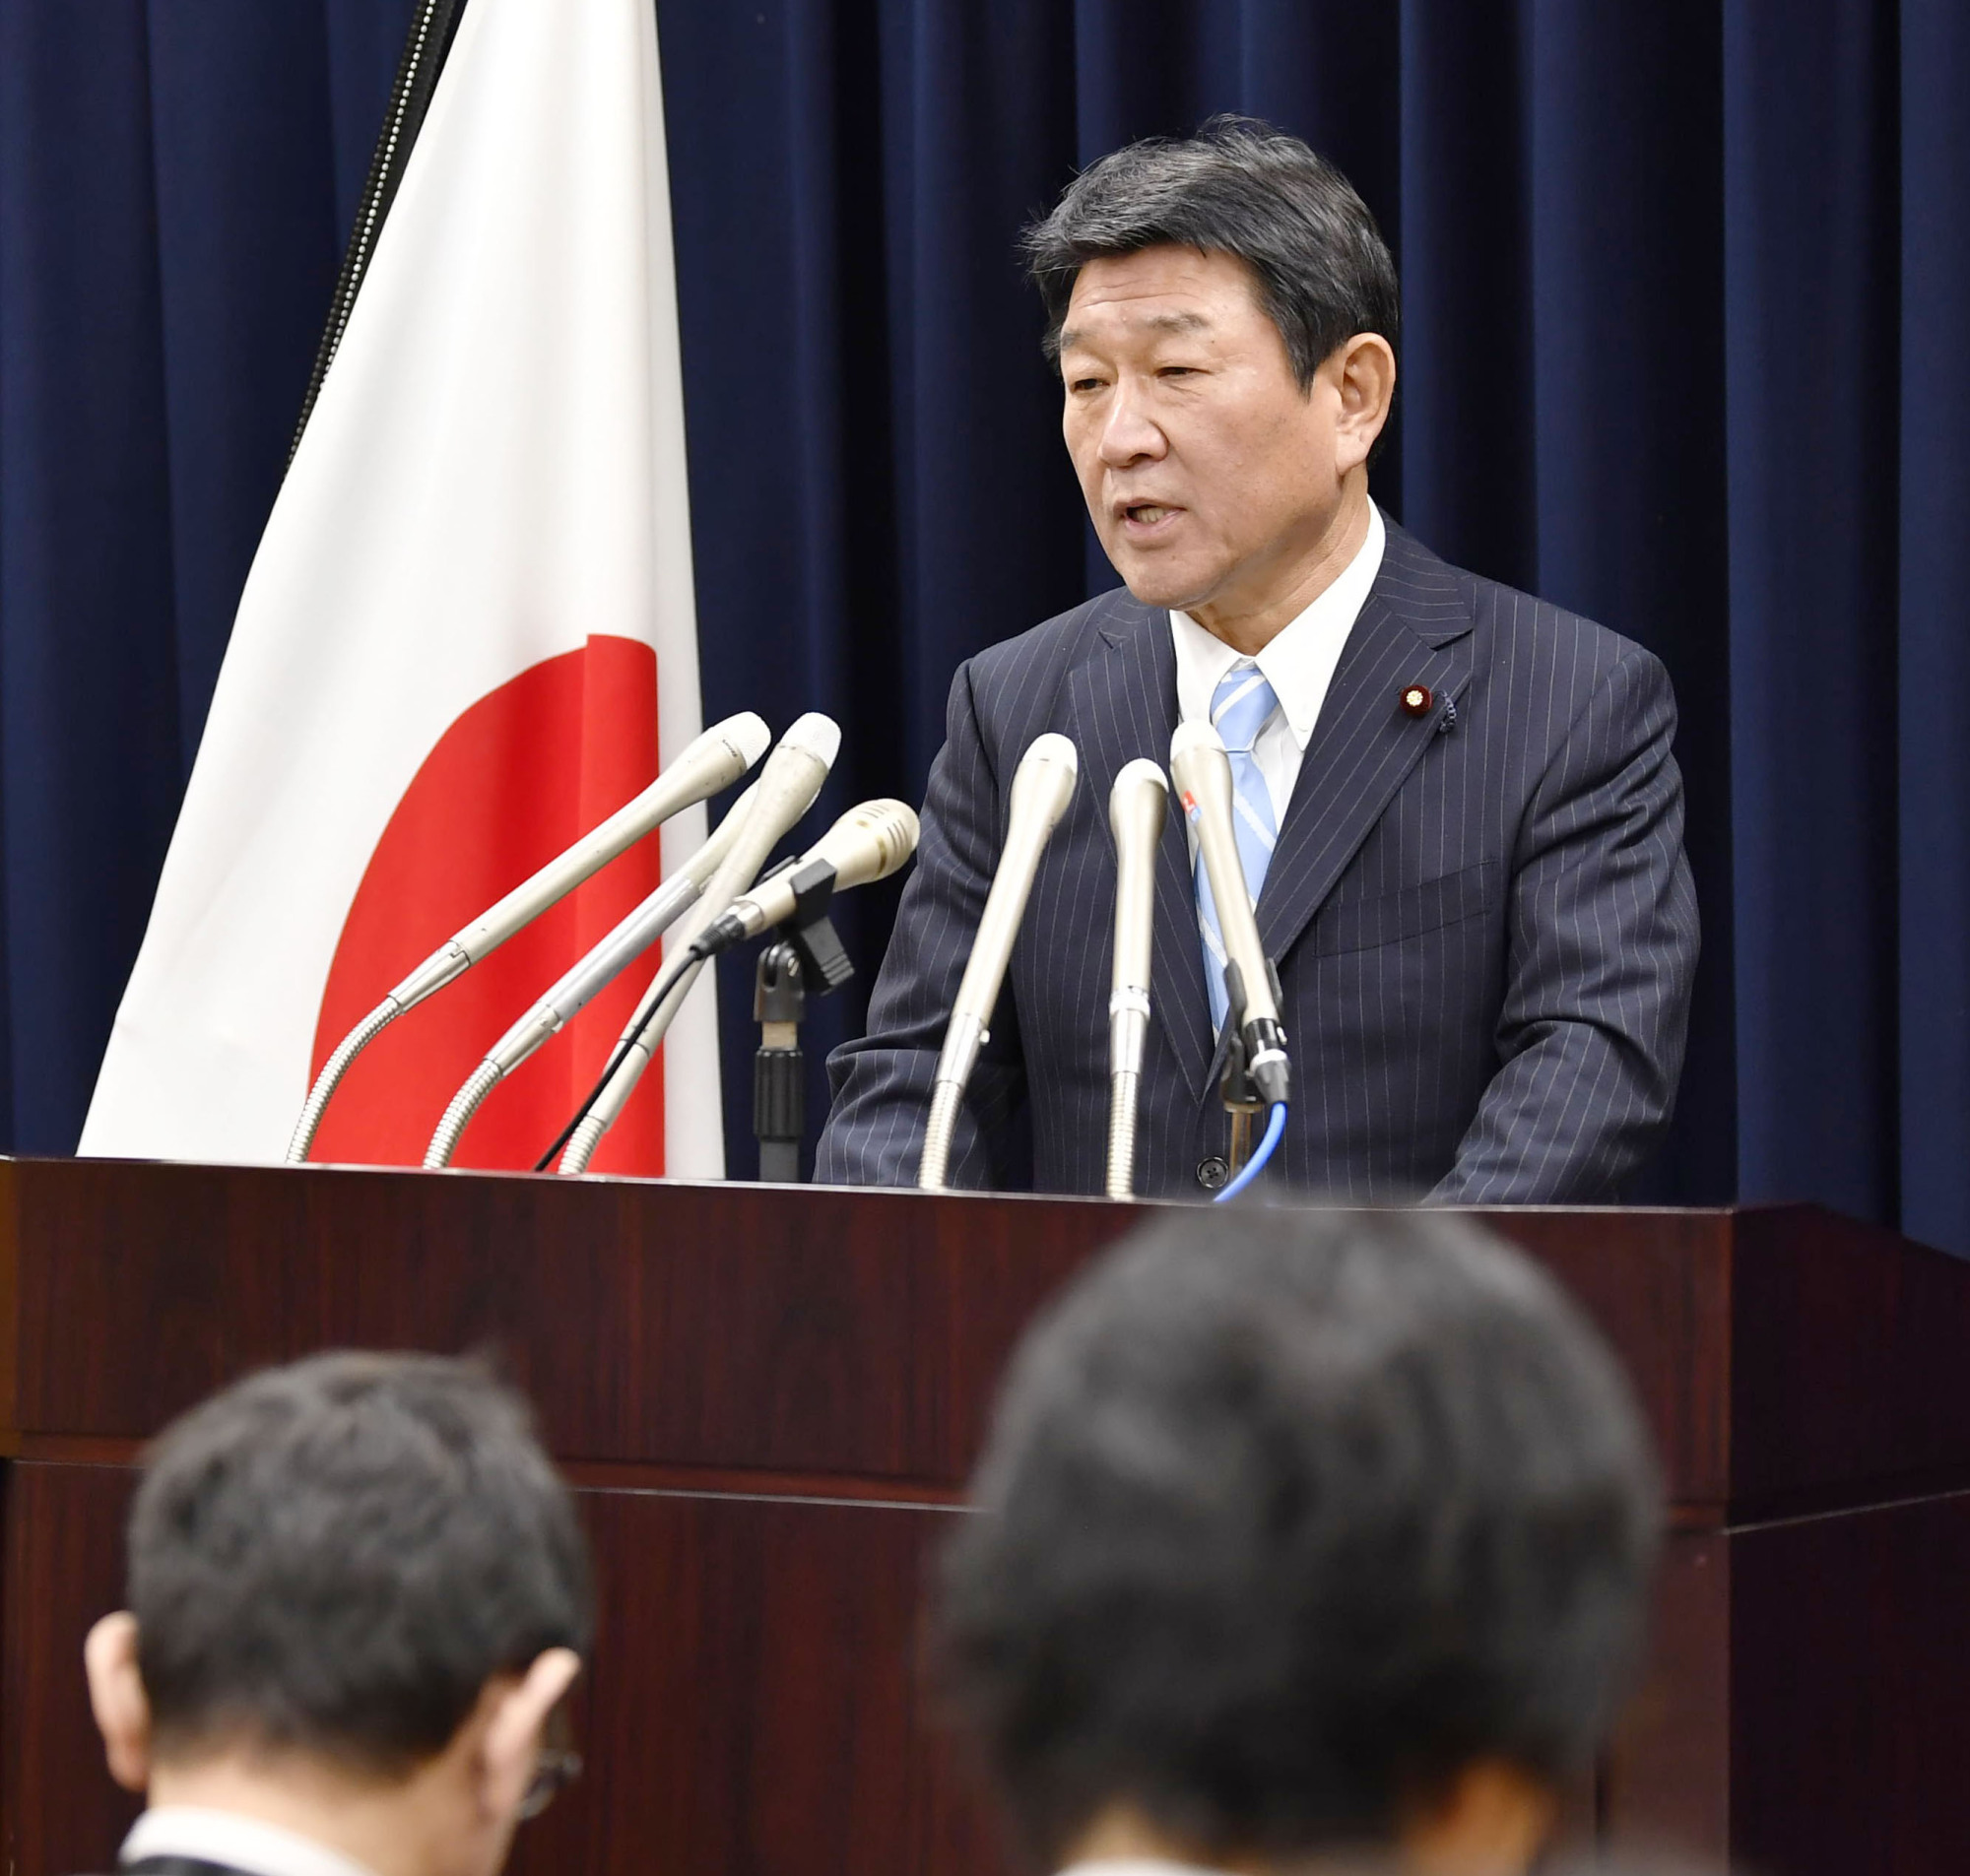 Toshimitsu Motegi, the government's minister in charge of TPP issues, speaks at a news conference on Tuesday in Tokyo. | KYODO